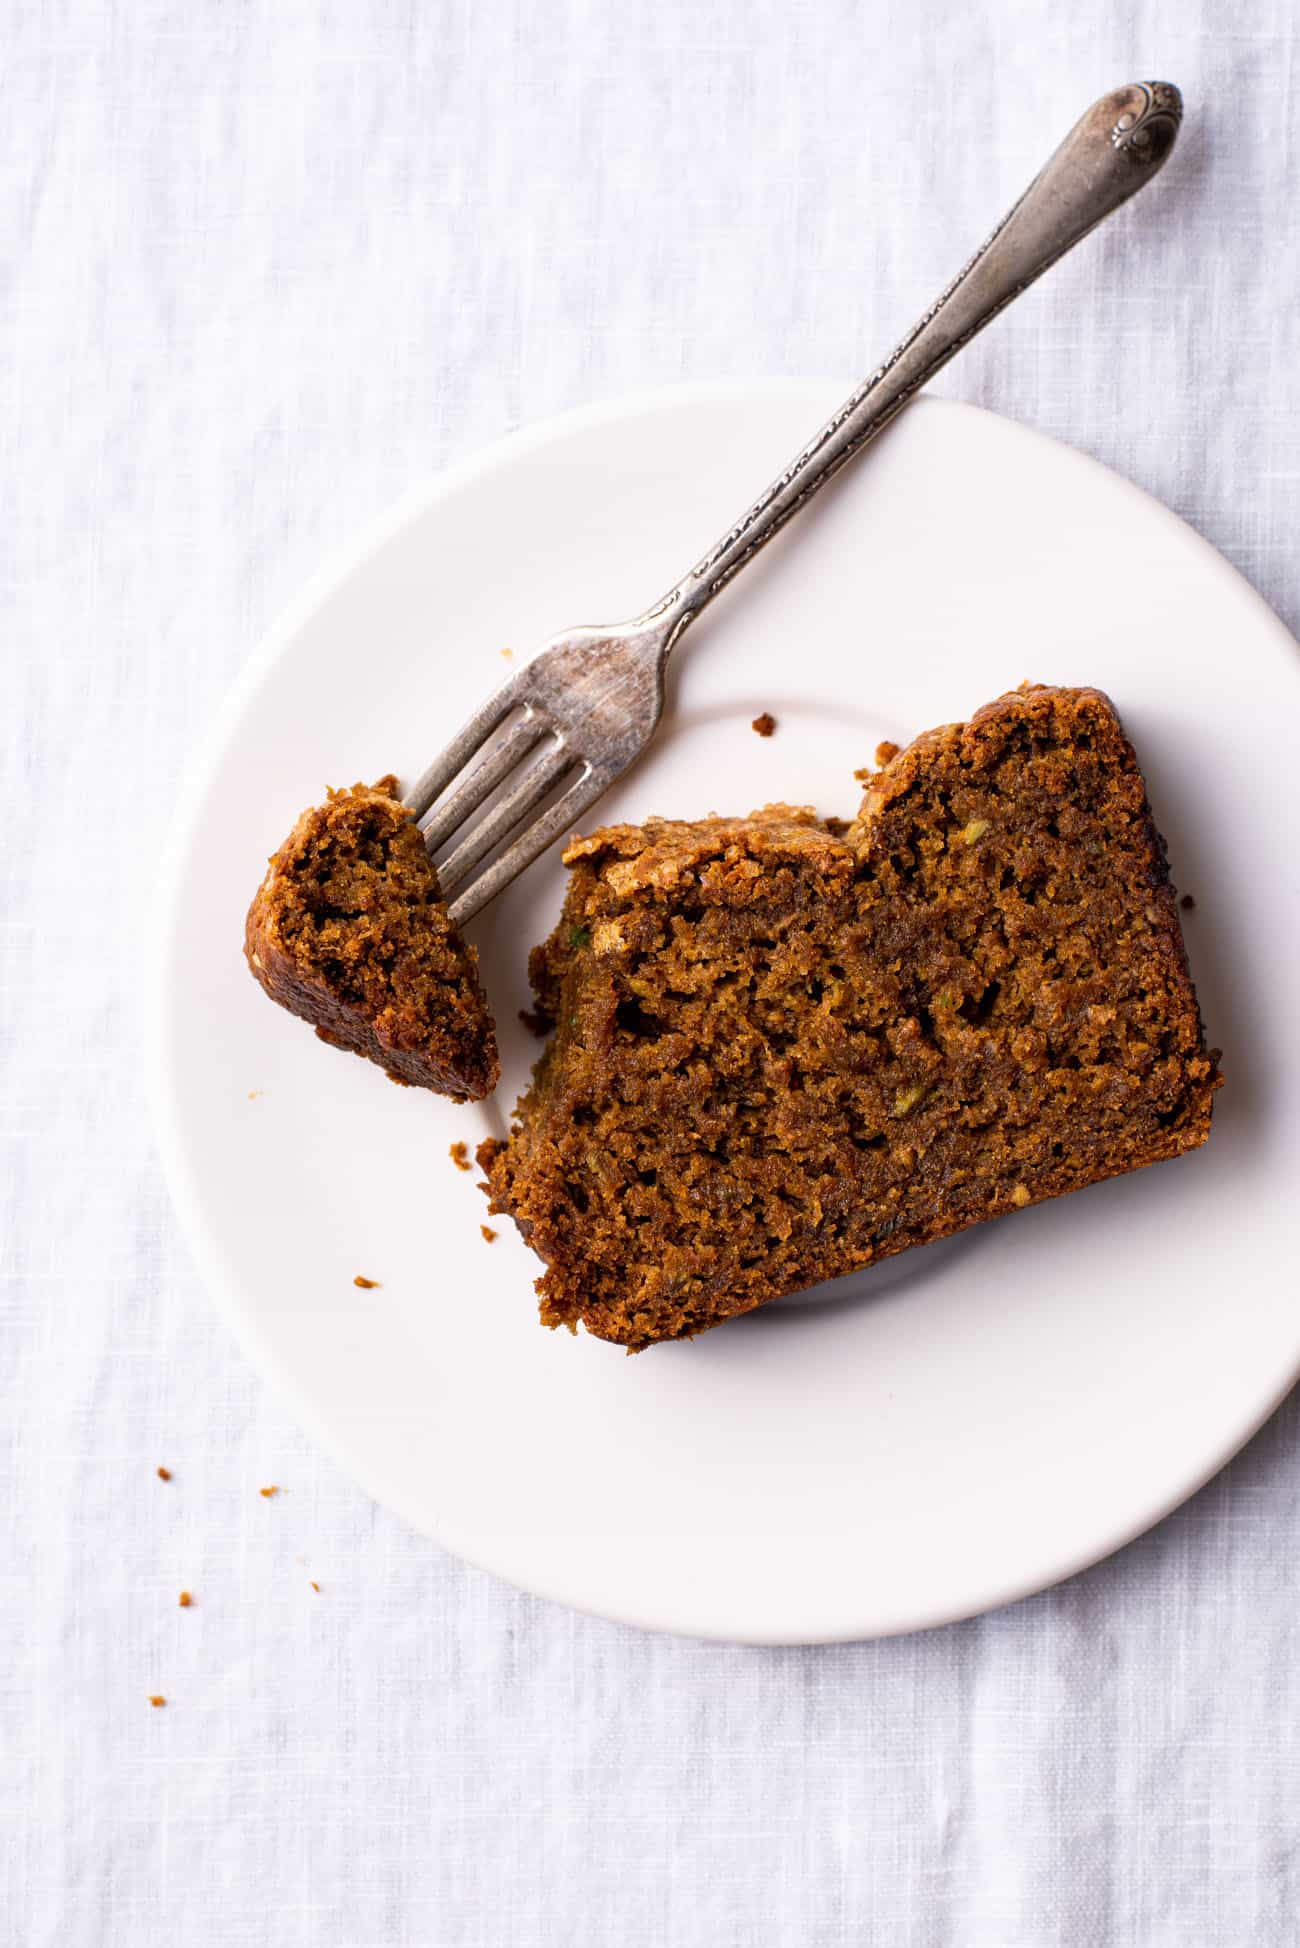 A slice of gingerbread cake on a white ceramic plate with a fork